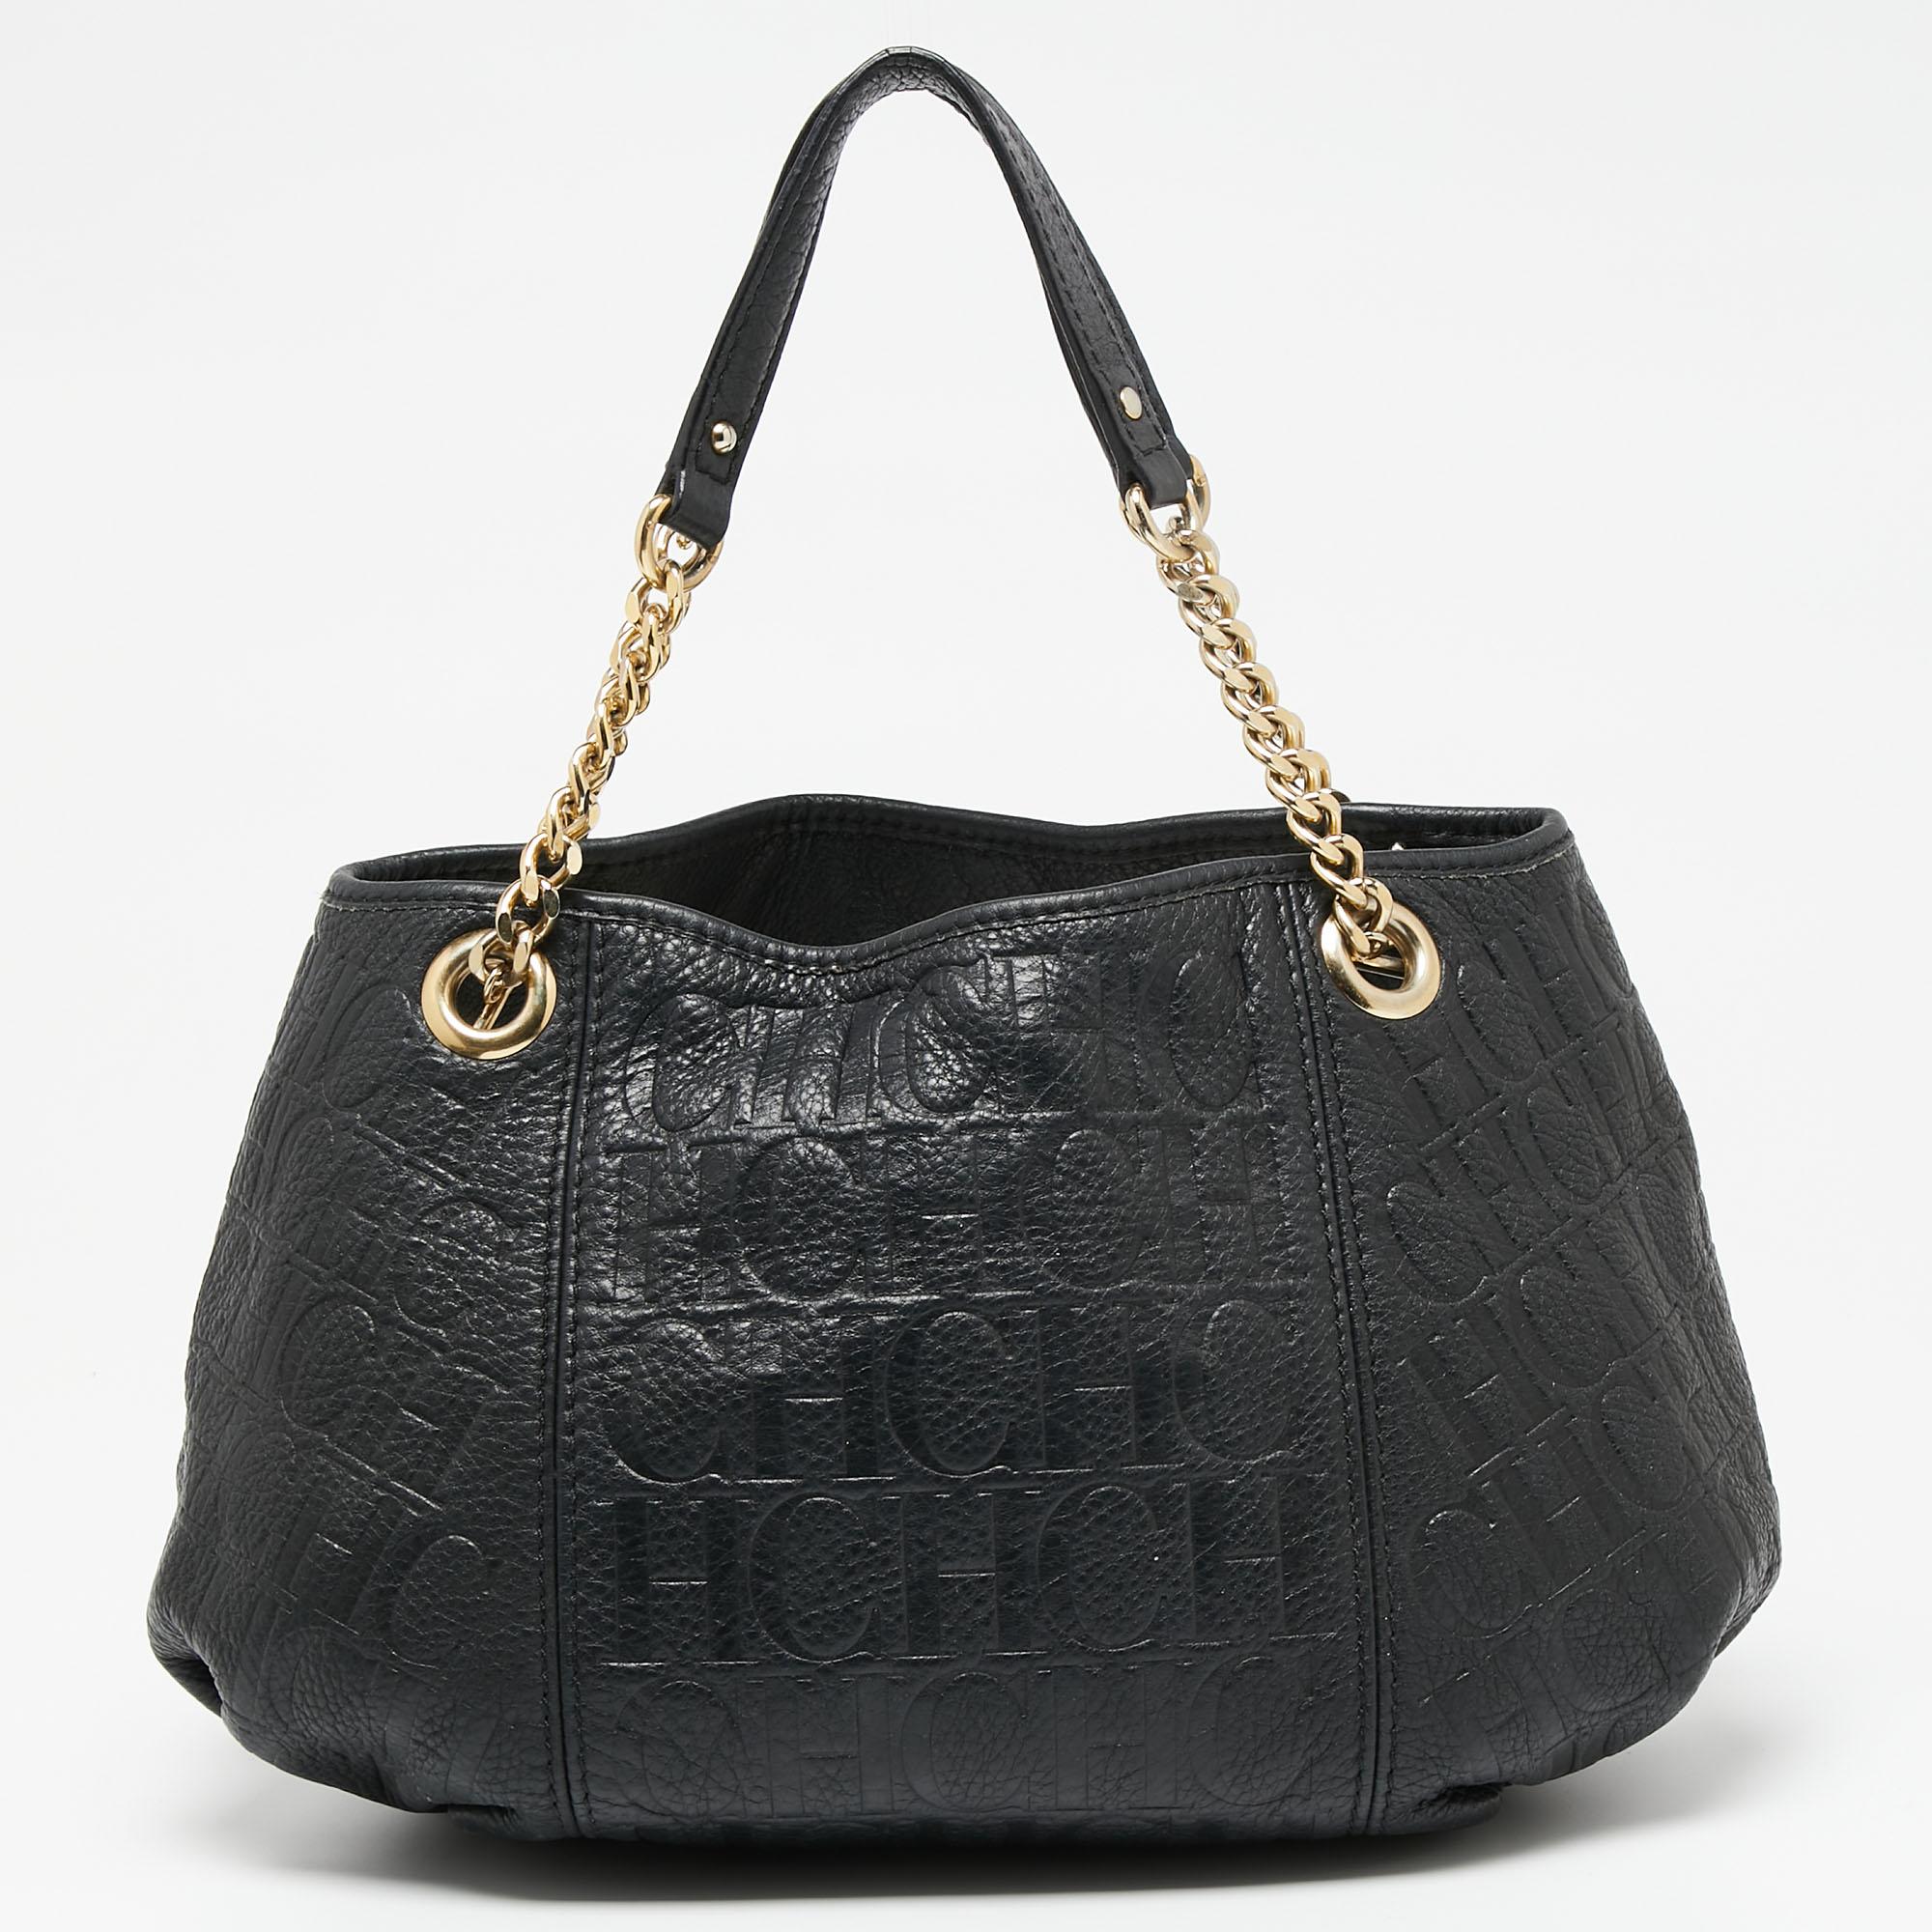 This CH Carolina Herrera hobo will infuse luxury and sophistication into your outfit. Crafted from the signature monogram embossed leather, it features gold-tone hardware and is held by dual chain-leather handles. The interior of this bag is